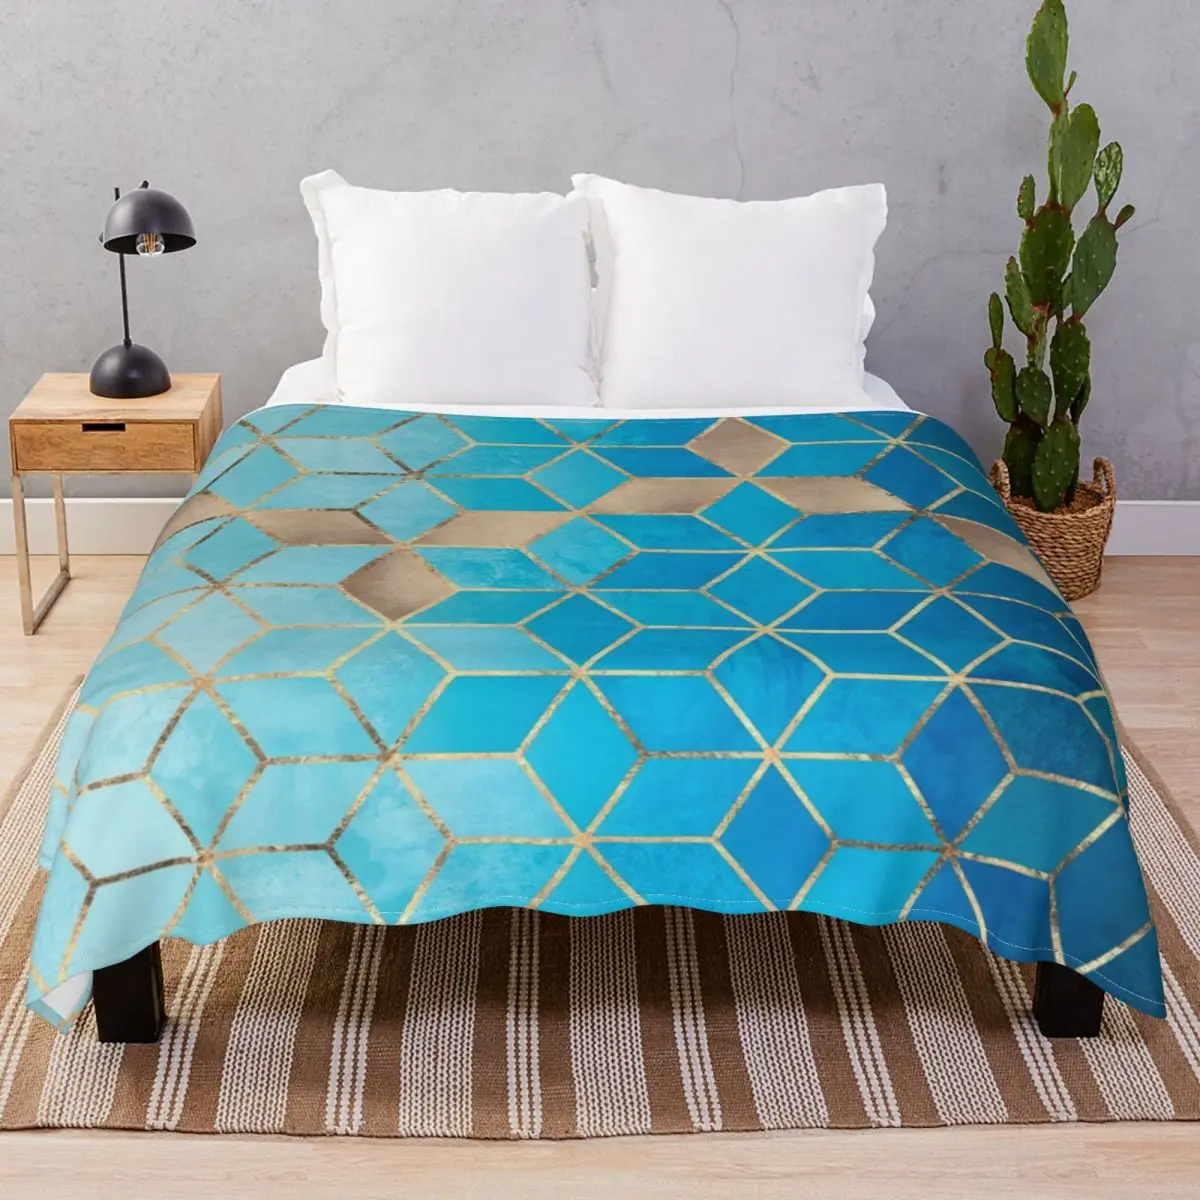 Sea And Sky Cubes Blanket Flannel Print Ultra-Soft Unisex Throw Blankets for Bed Home Couch Camp Cinema